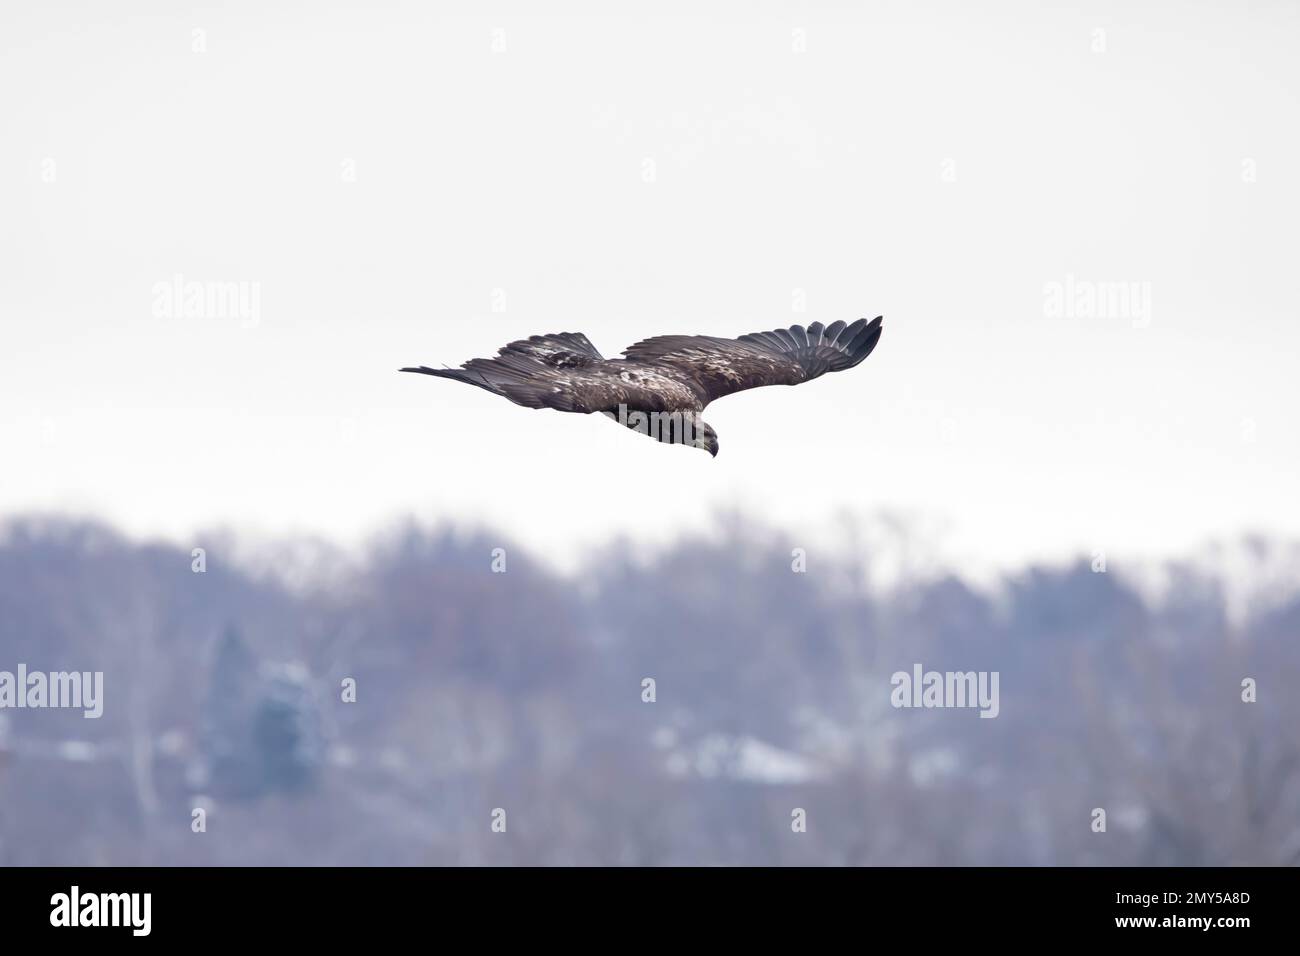 Juvenile bald eagle flies downward over the Mississippi River in Davenport, Iowa, with blue sky and blurred trees in the background. Stock Photo